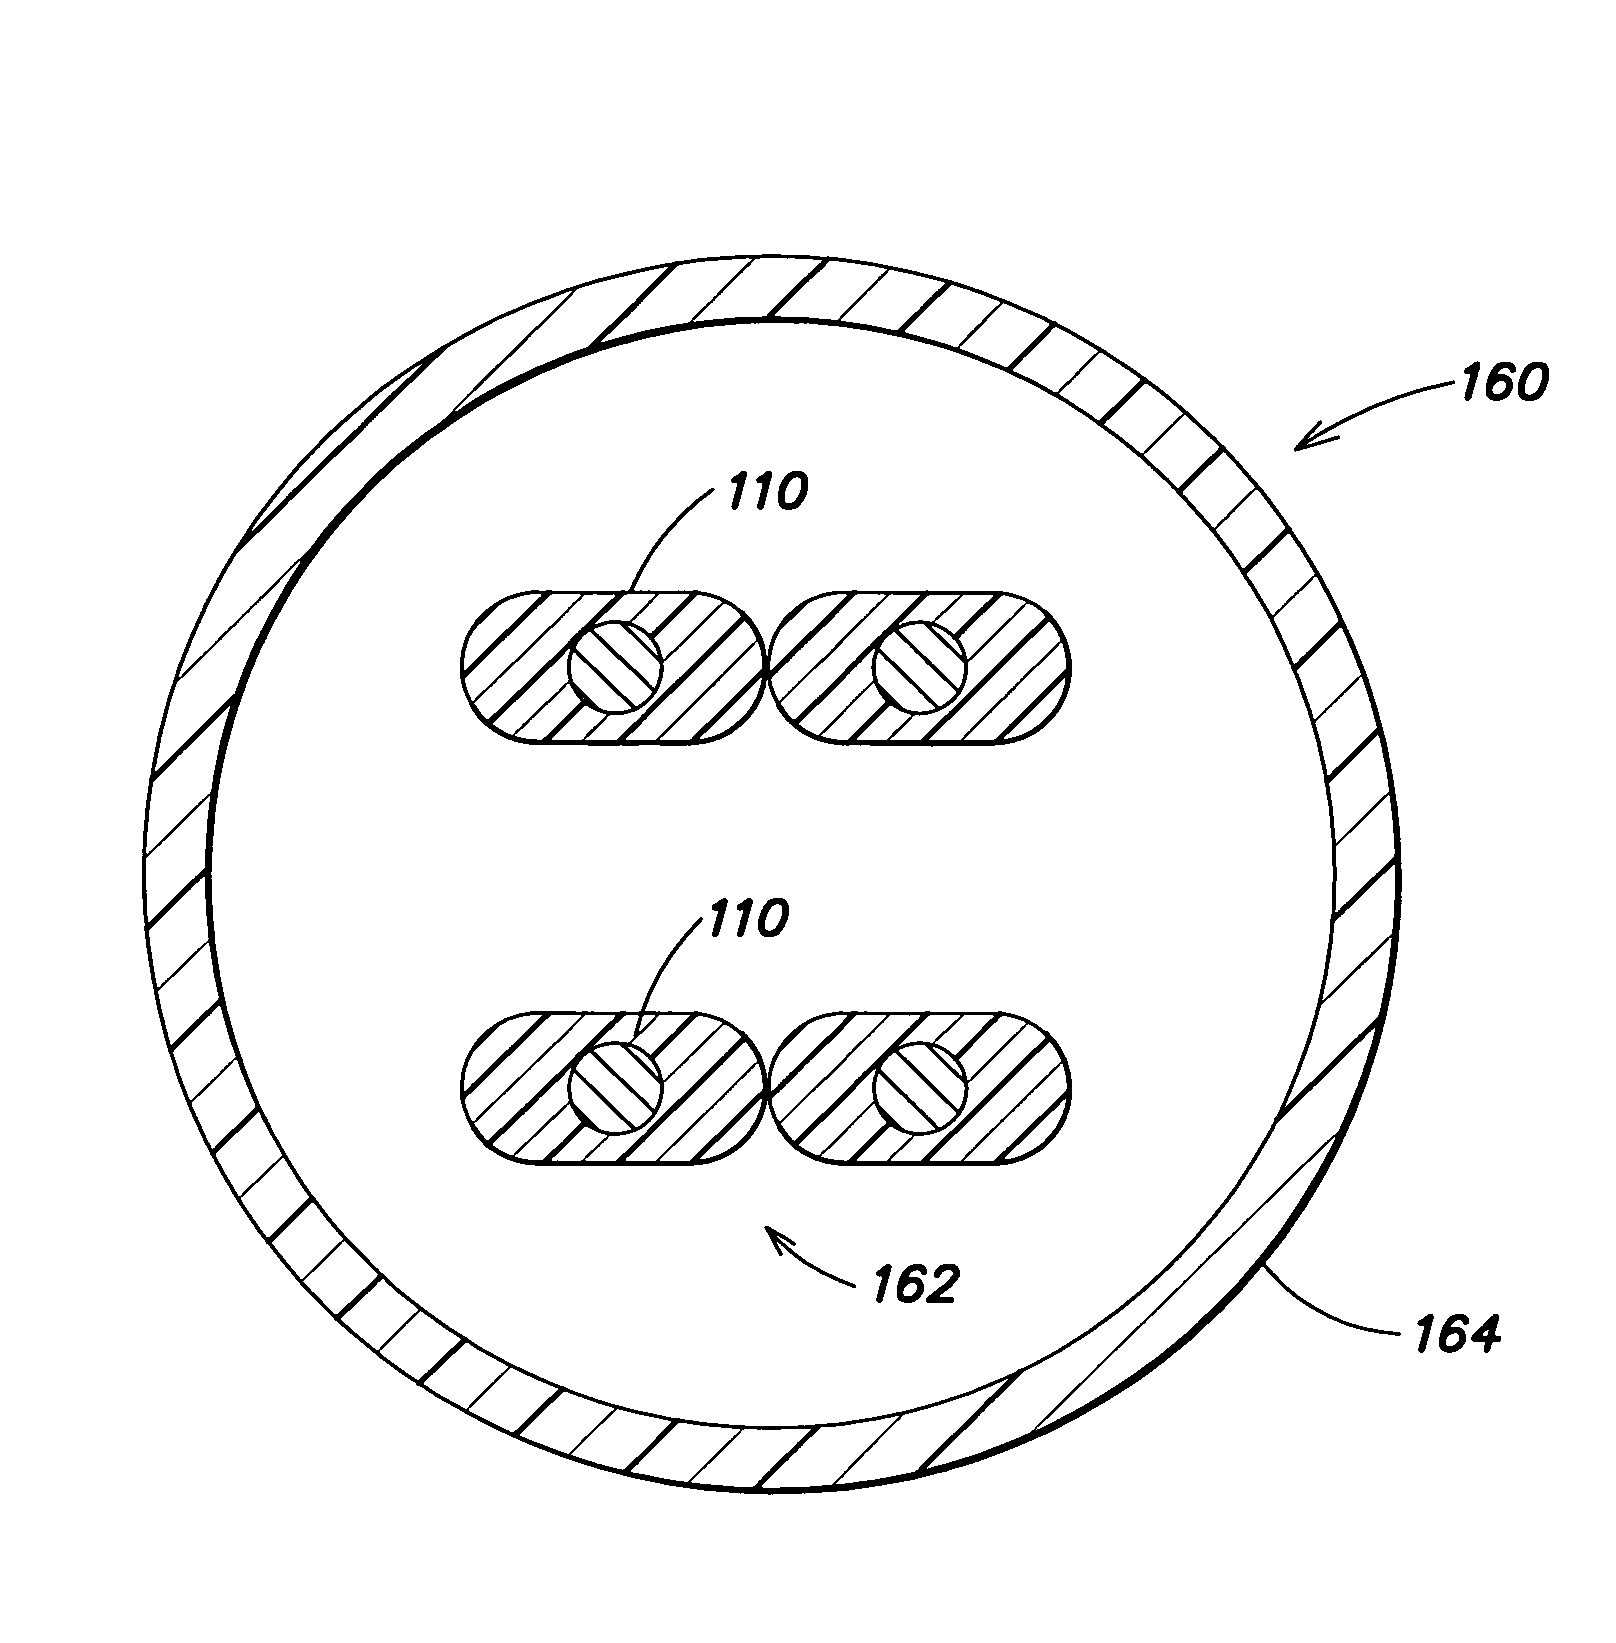 Electrical cable comprising geometrically optimized conductors